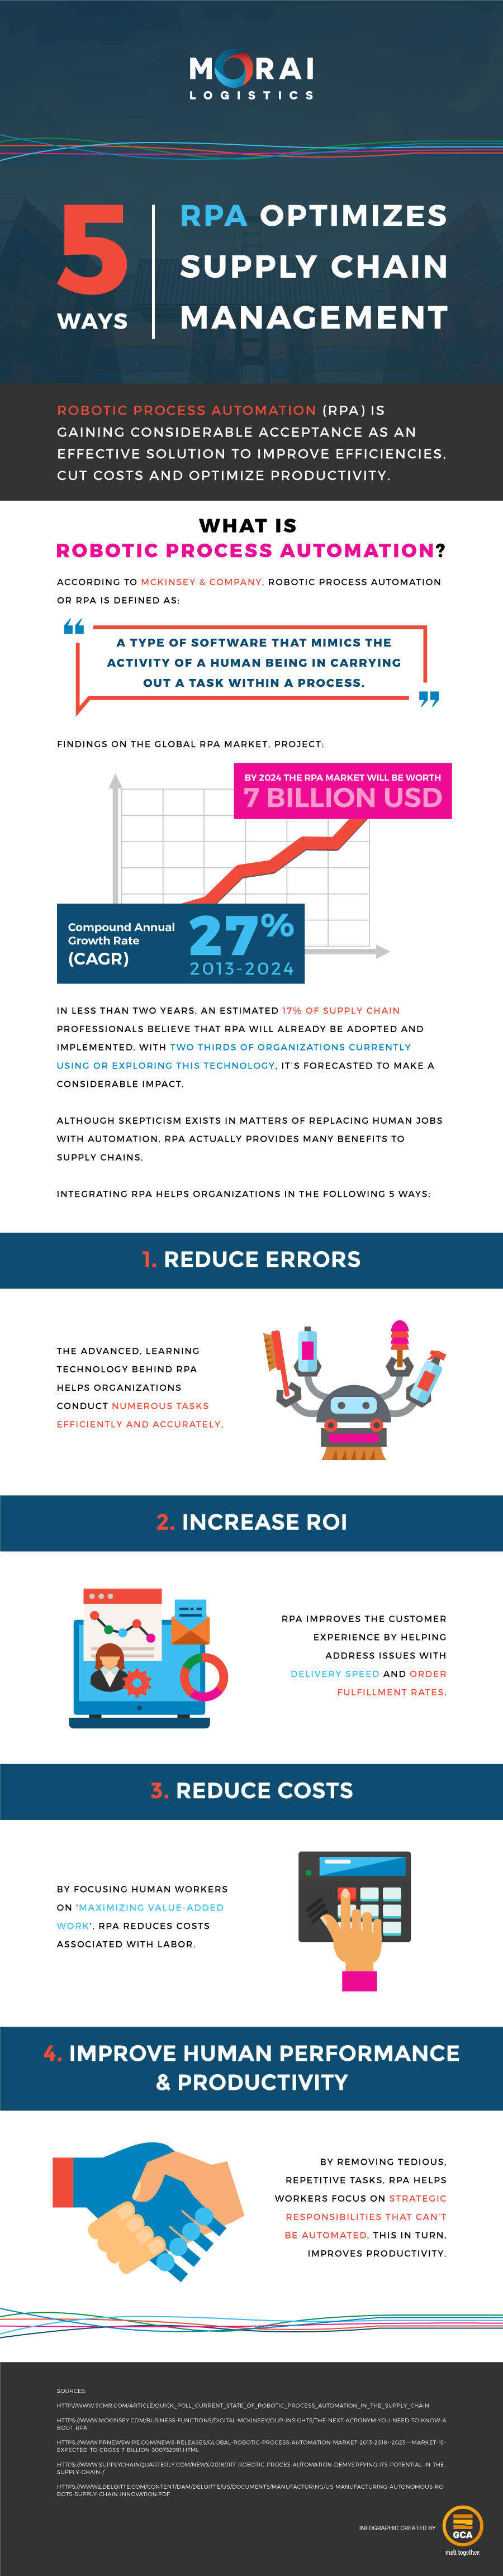 morai-infographic-5-rpa-optimizes-supply-chain-management (3)